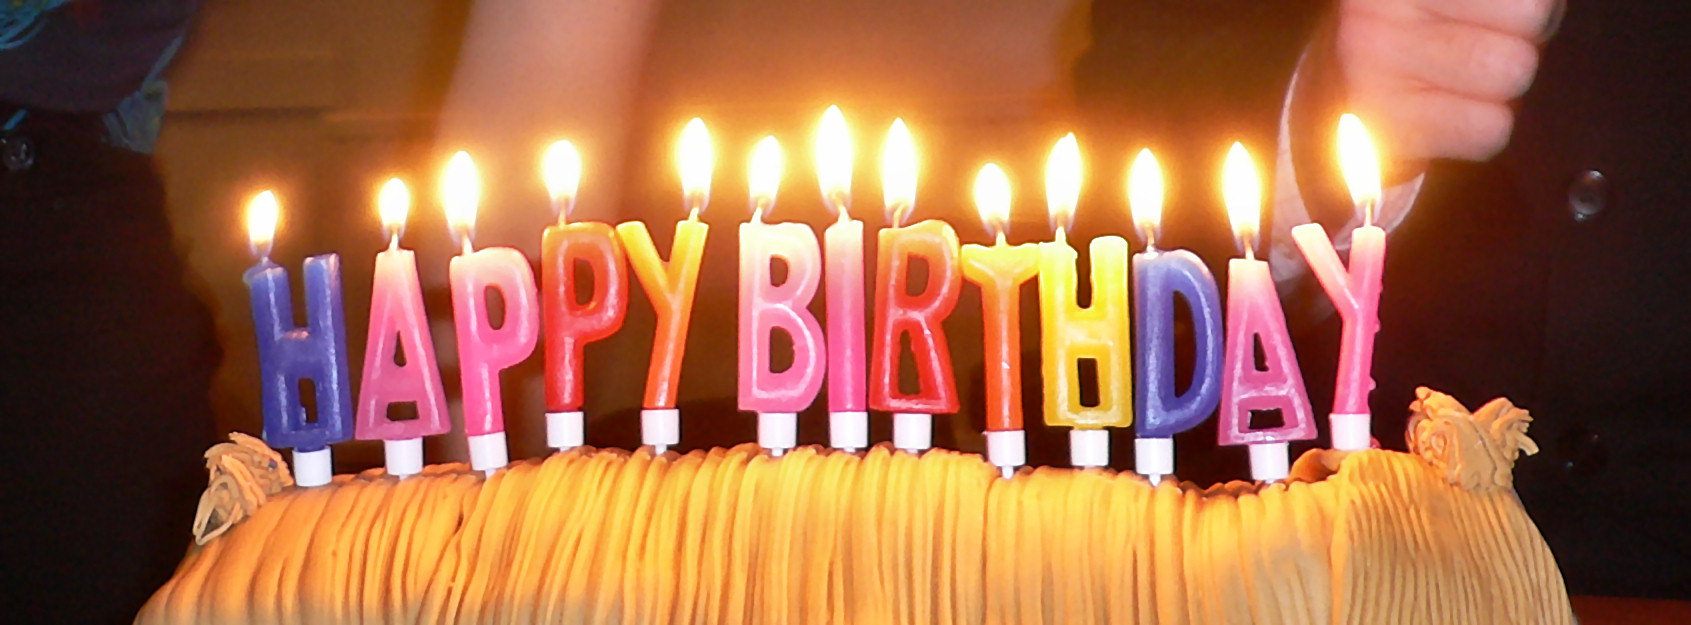 Warner Music Group Fighting For Rights Back To ‘Happy Birthday’ Song